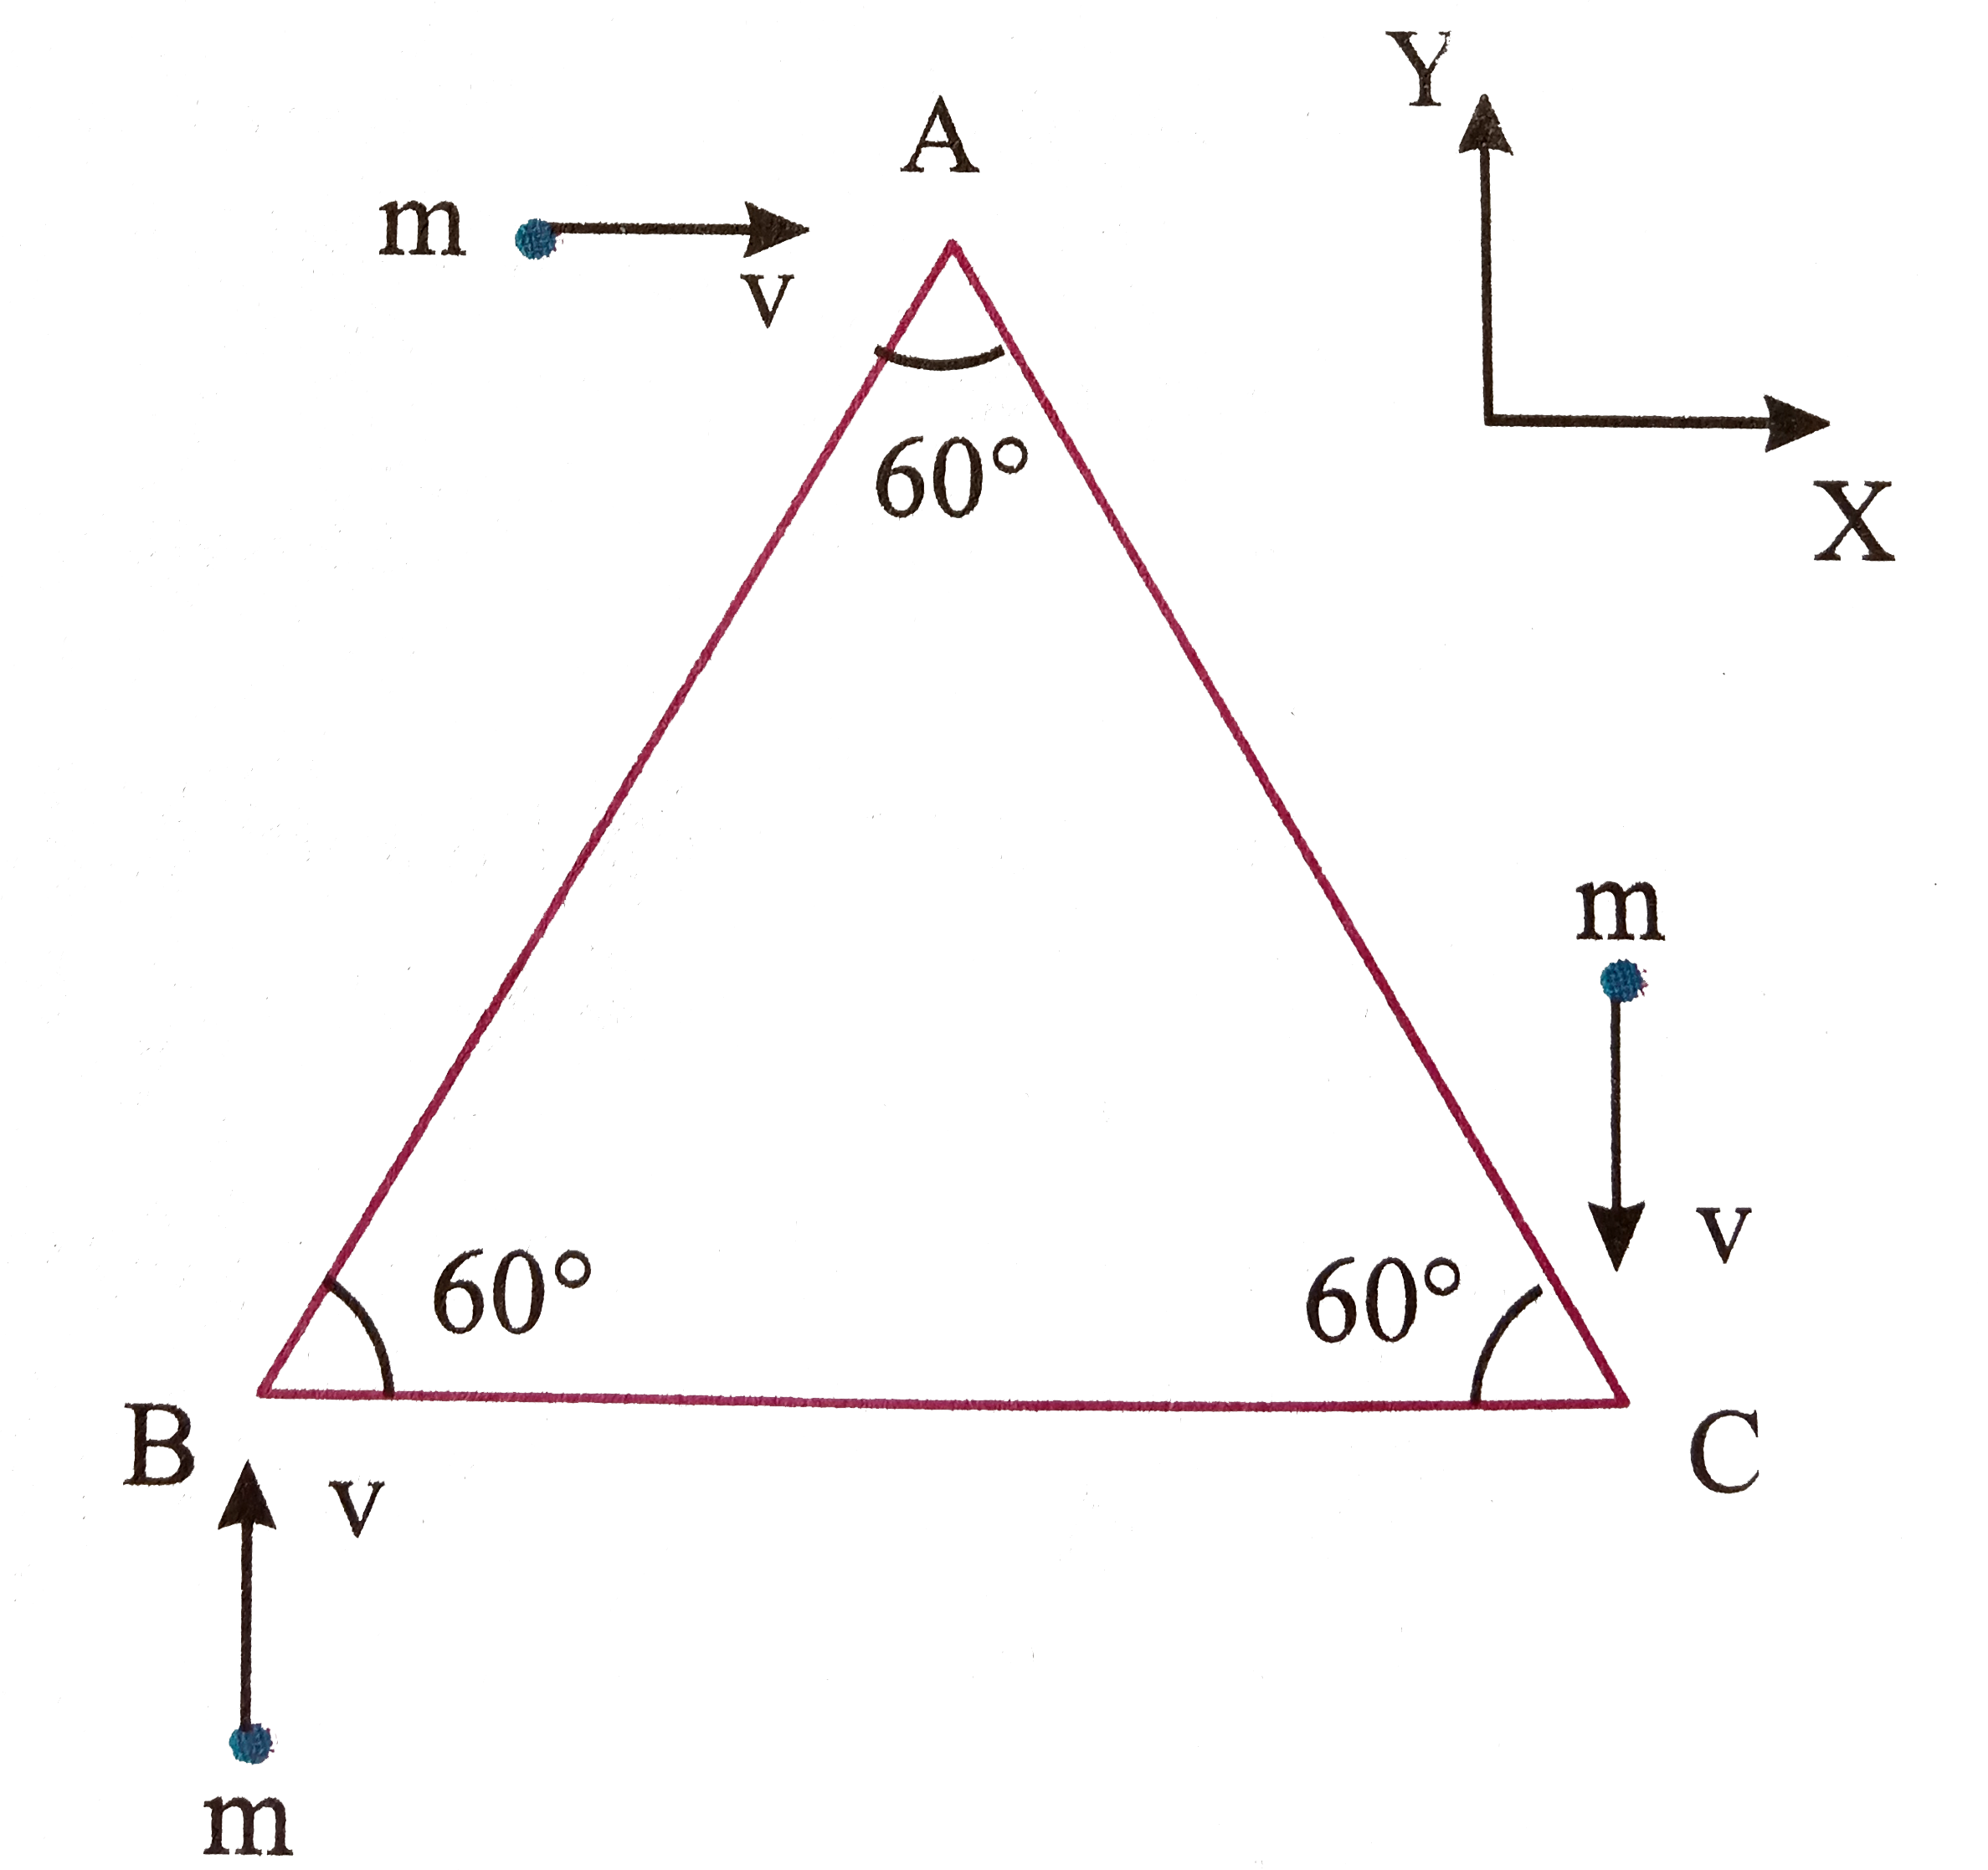 A triangular block ABC of mass m and side 2a lies on a smooth horizontal plane as shown. Three point masses of mass m each strikes the  block at A, B and C with speed as shown. After the collision the particle come to rest. Then